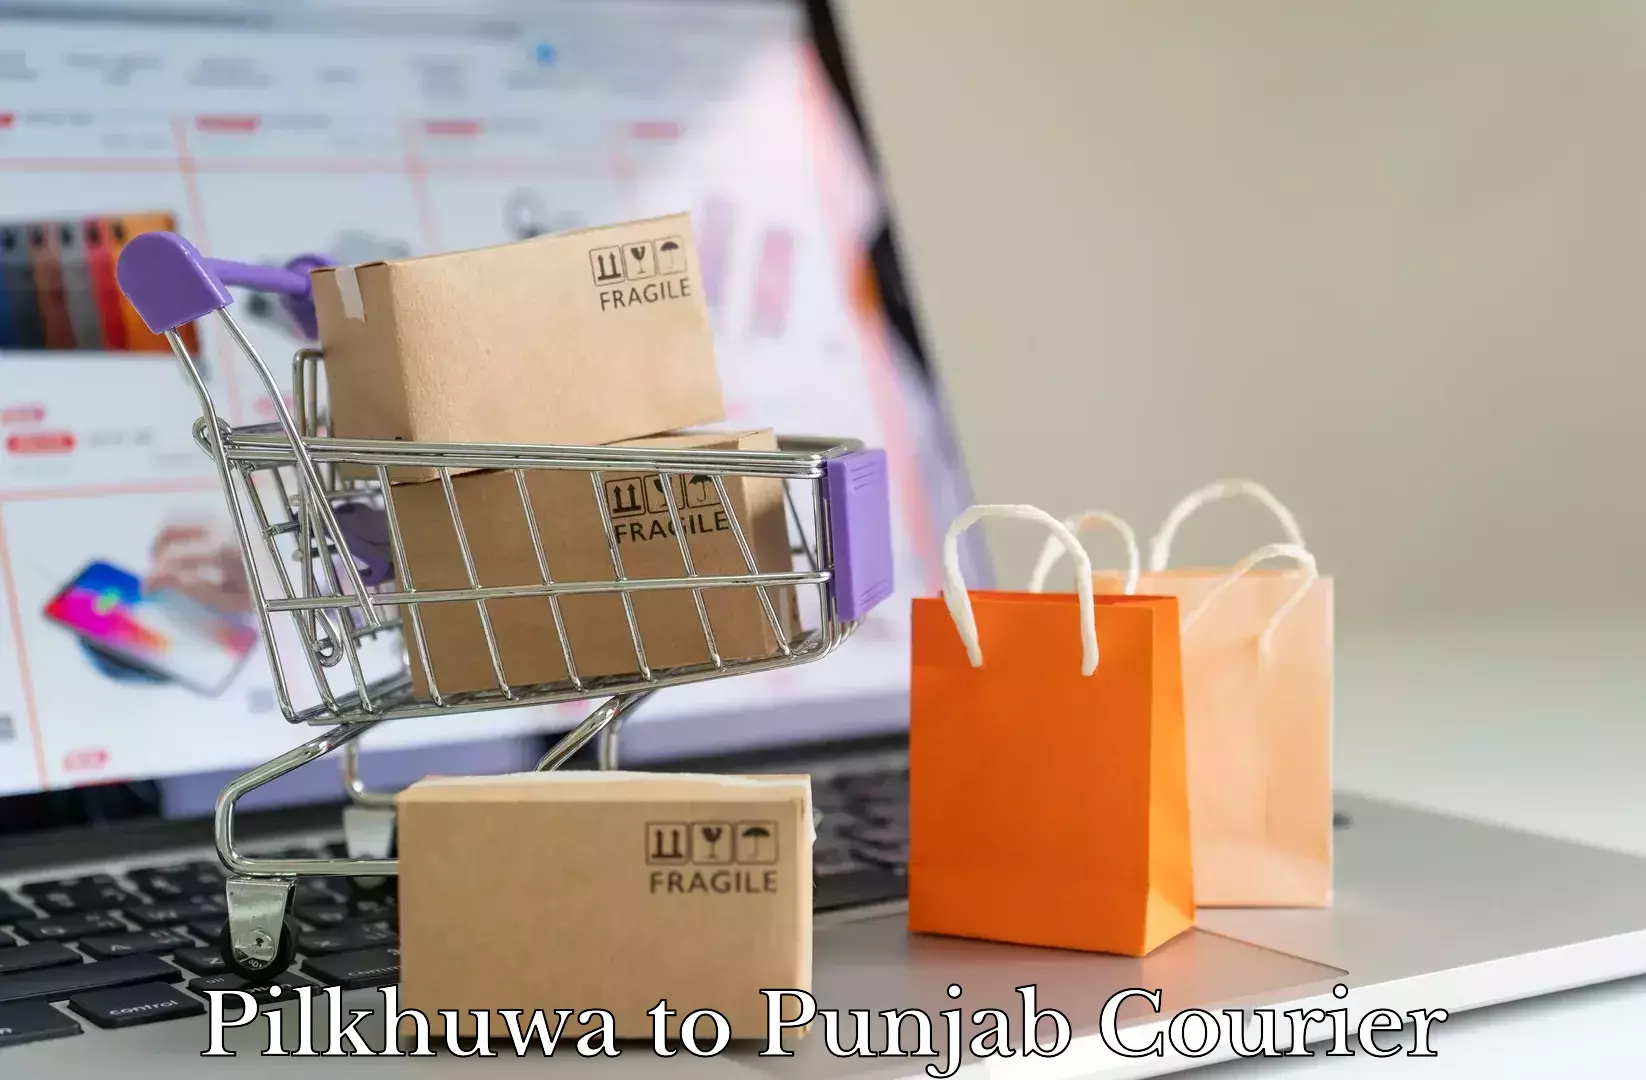 Comprehensive moving services Pilkhuwa to Punjab